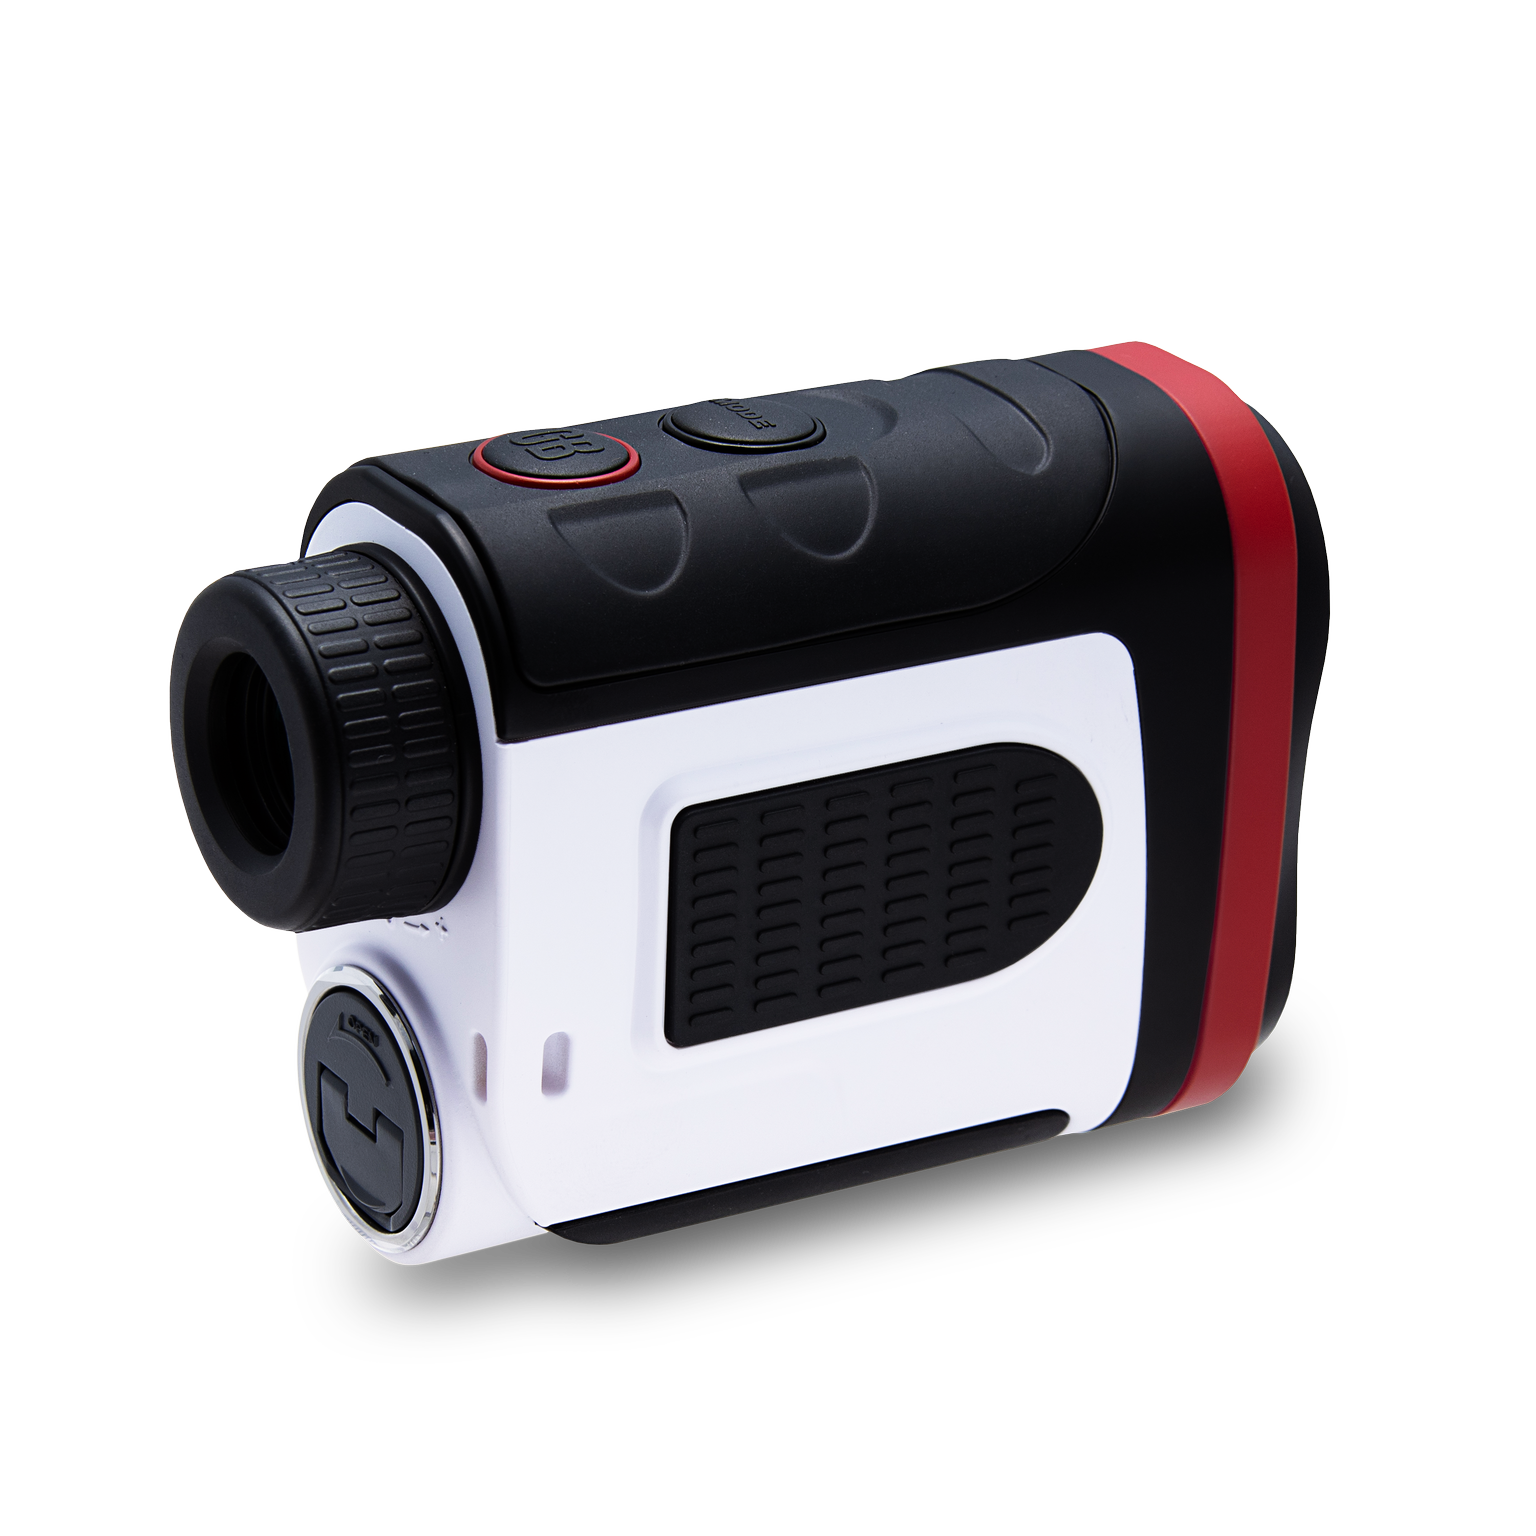 GOLFBUDDY launches Laser 1, Laser 1S and aim L10V 